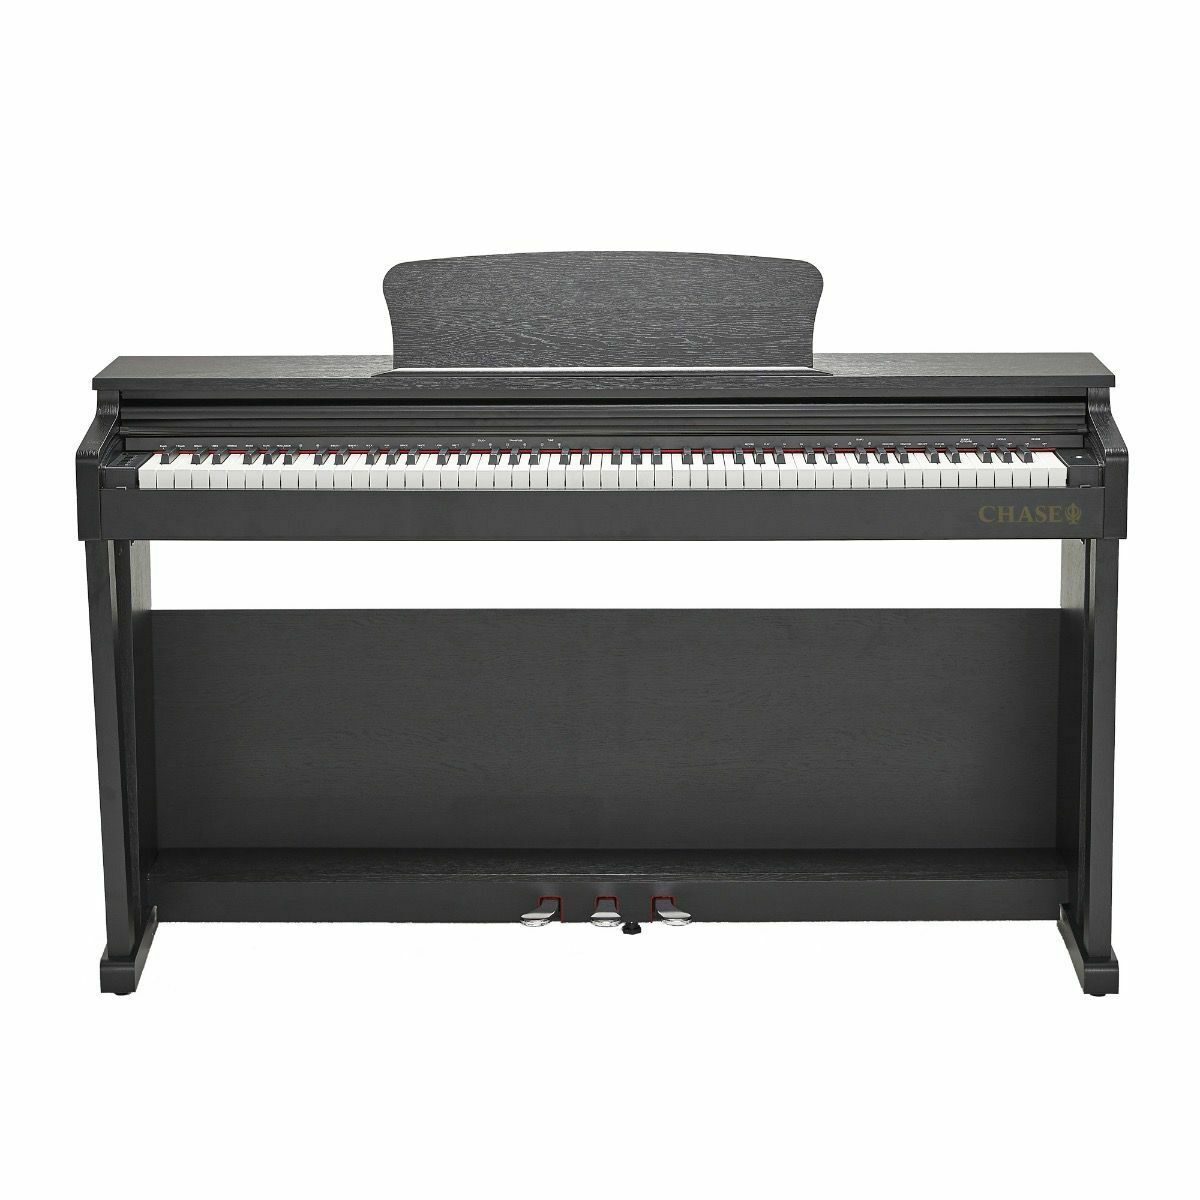 [ Free Upgrade Offer For Casio AP 260 ] Chase CDP355 Digital Electric Piano in Cabinet - Available in Black , Rosewood, or White - RRP £799 / Sale Price £599 / Upgrade Free For £499